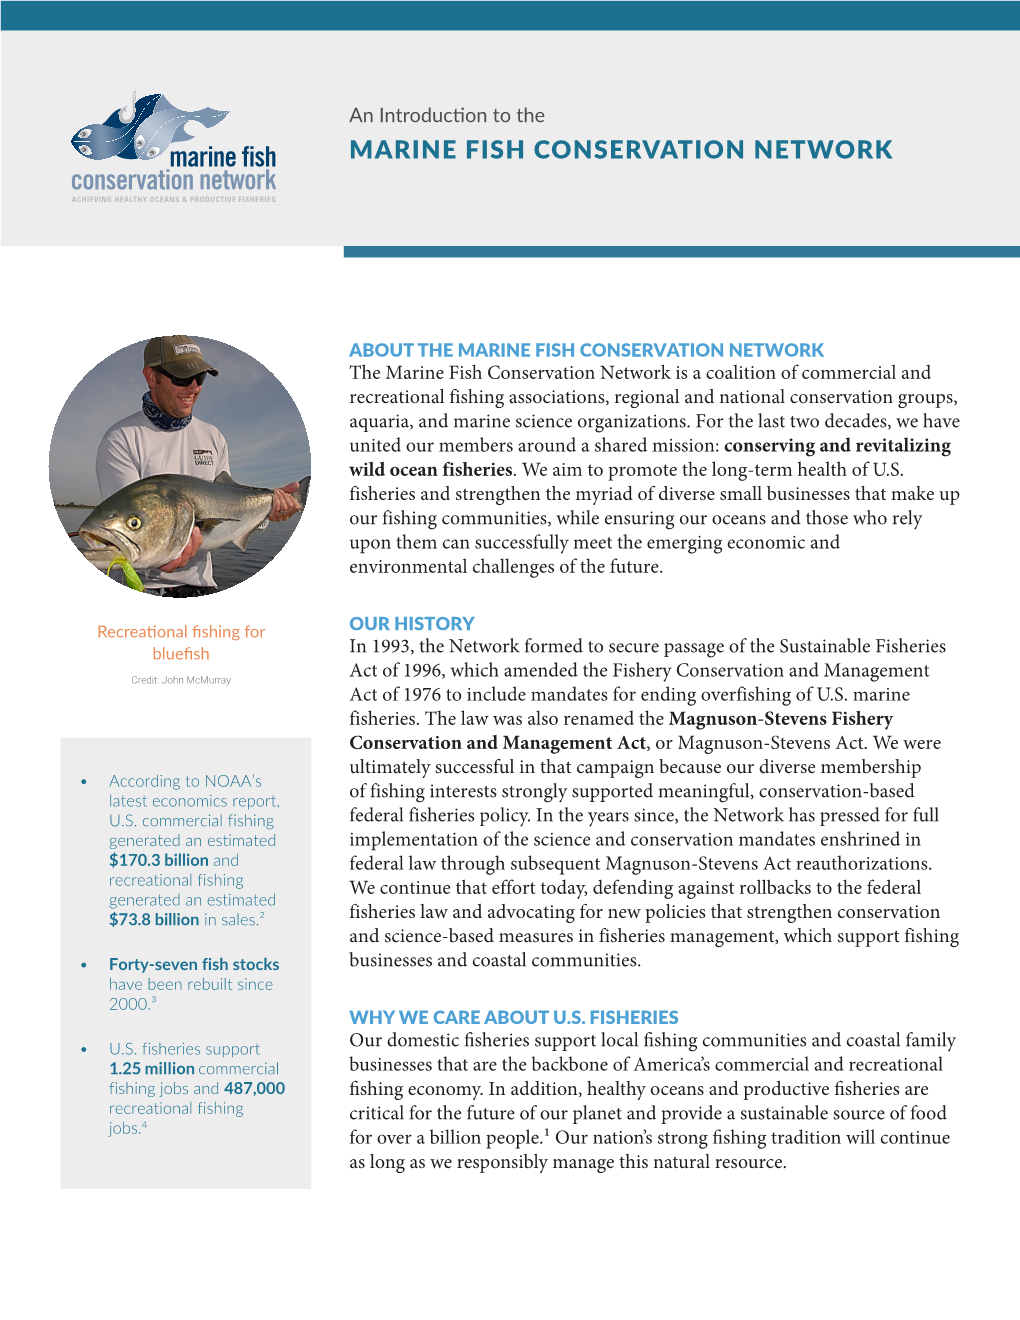 An Introduction to the MARINE FISH CONSERVATION NETWORK